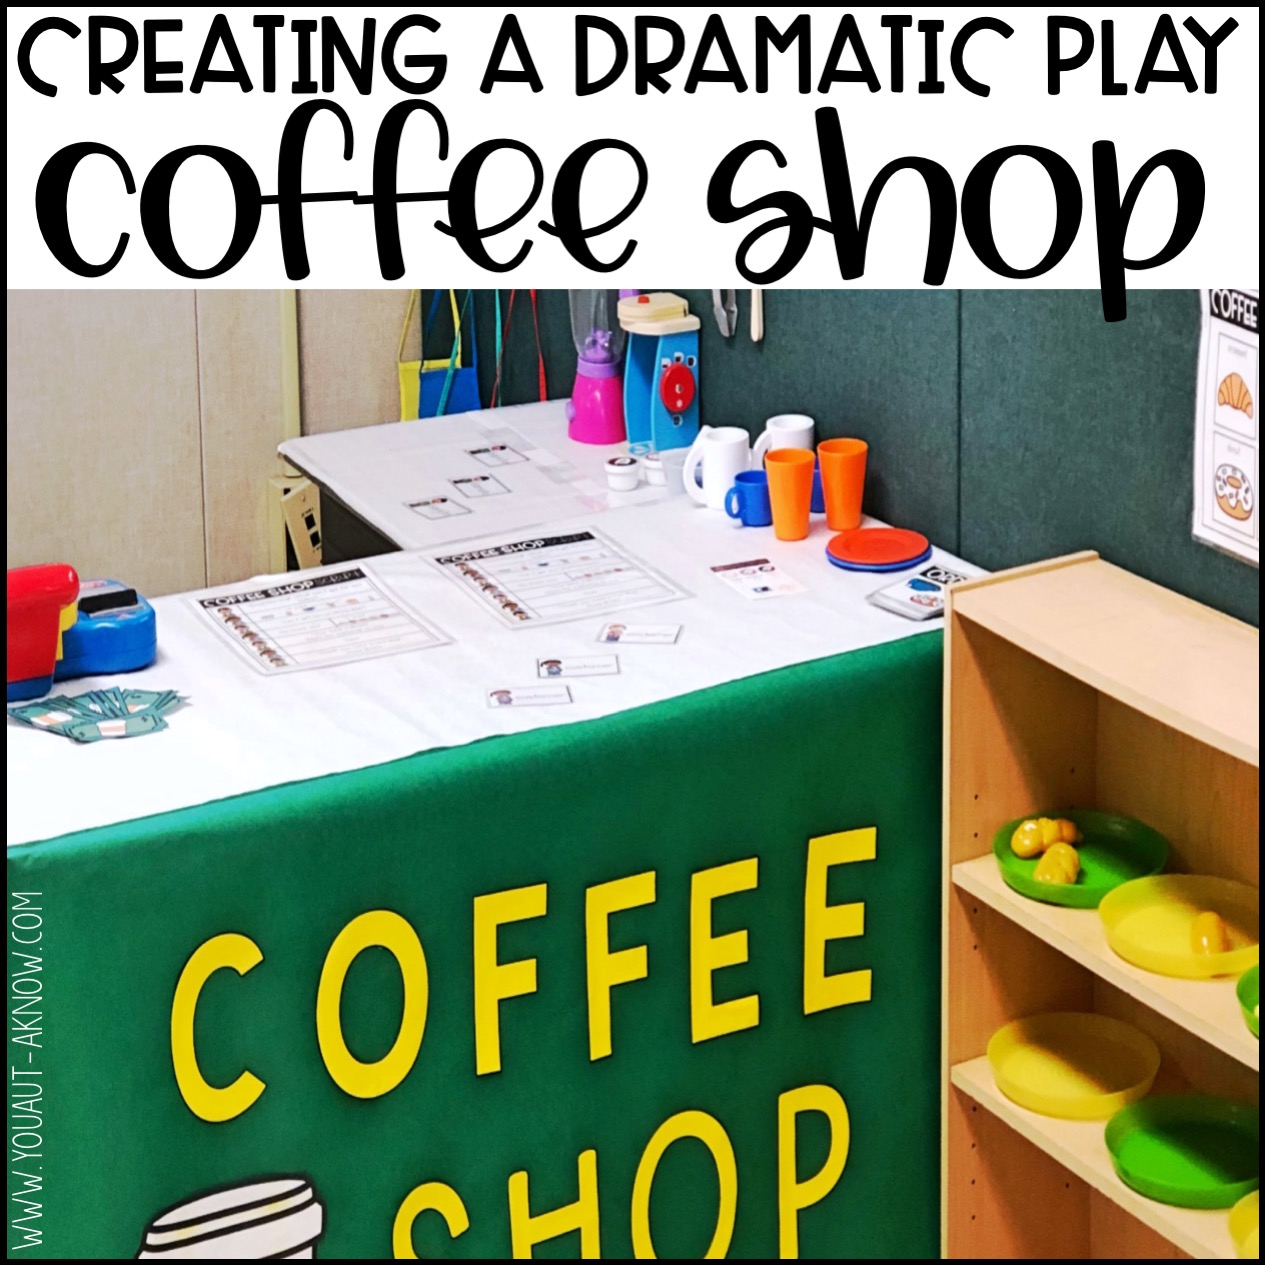 creating-a-dramatic-play-coffee-shop-in-the-special-education-classroom